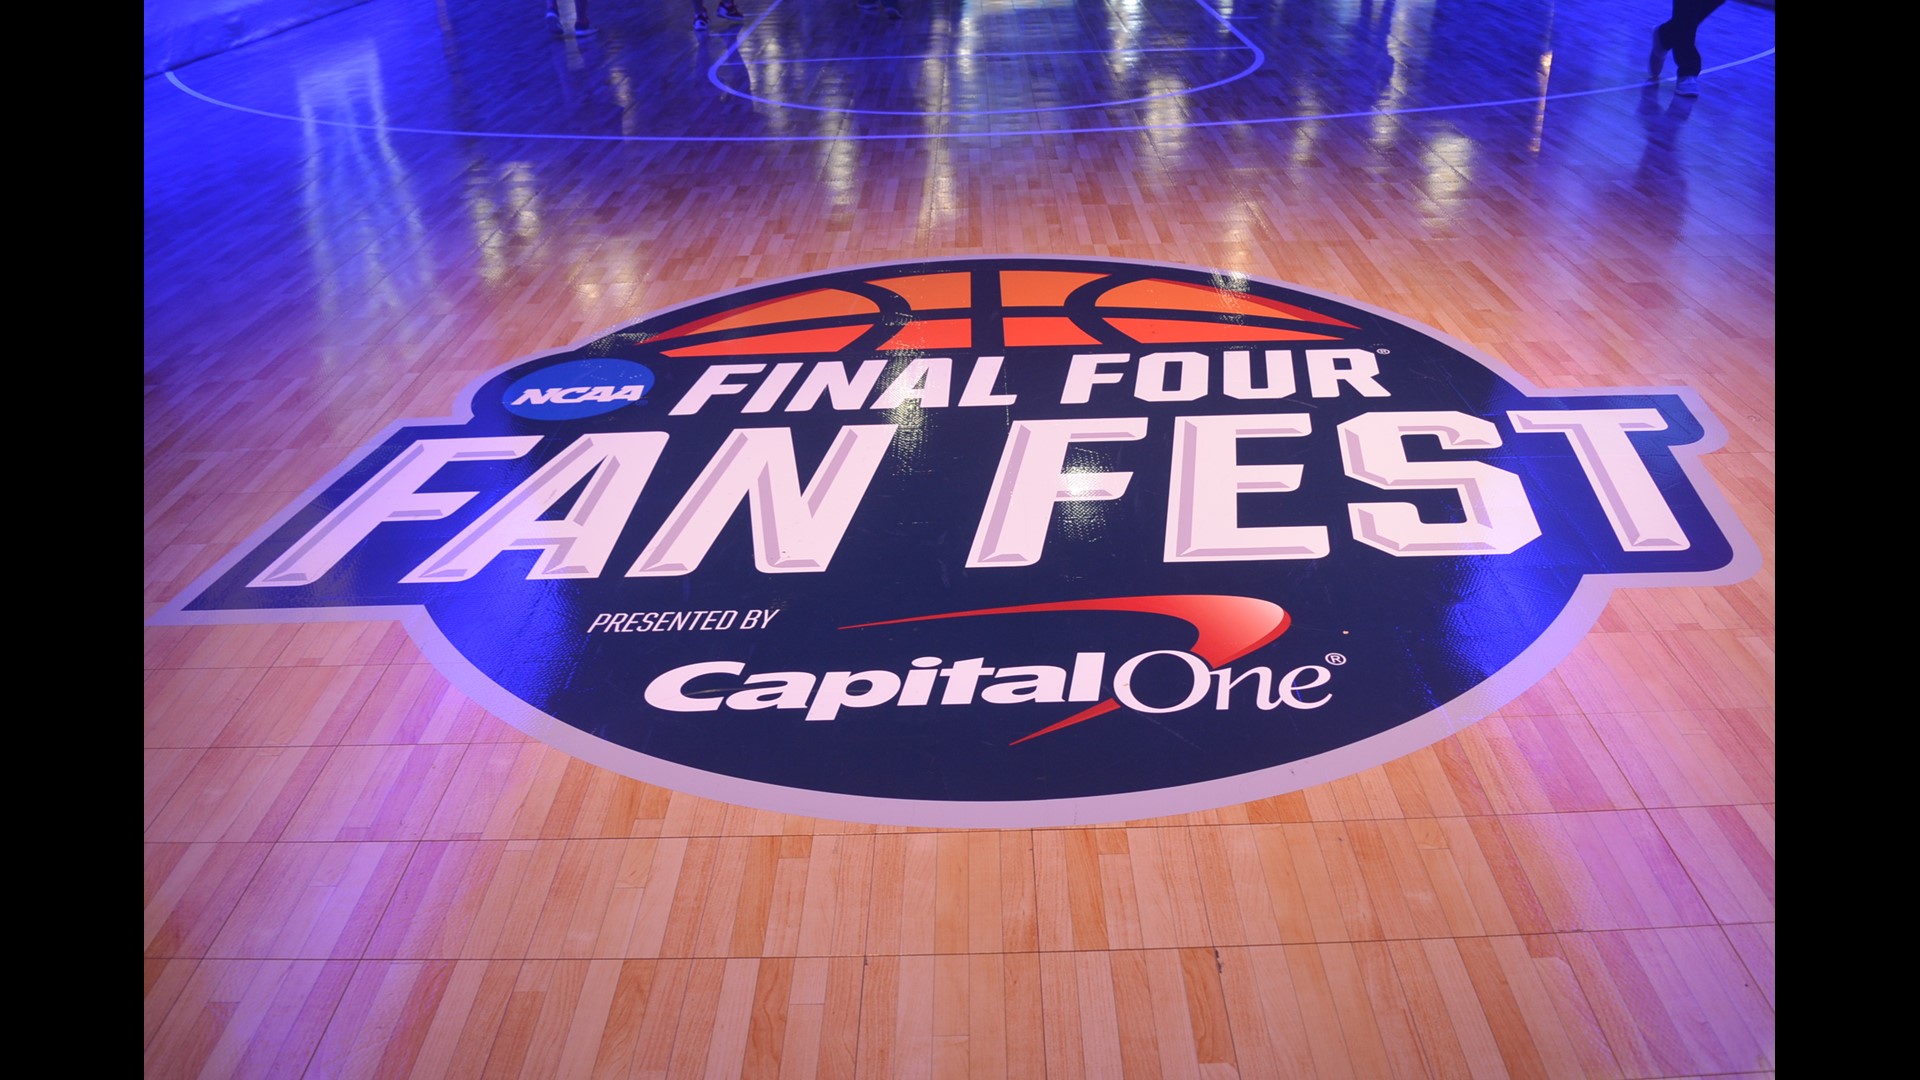 March Madness 2023 Final Four coming to Houston